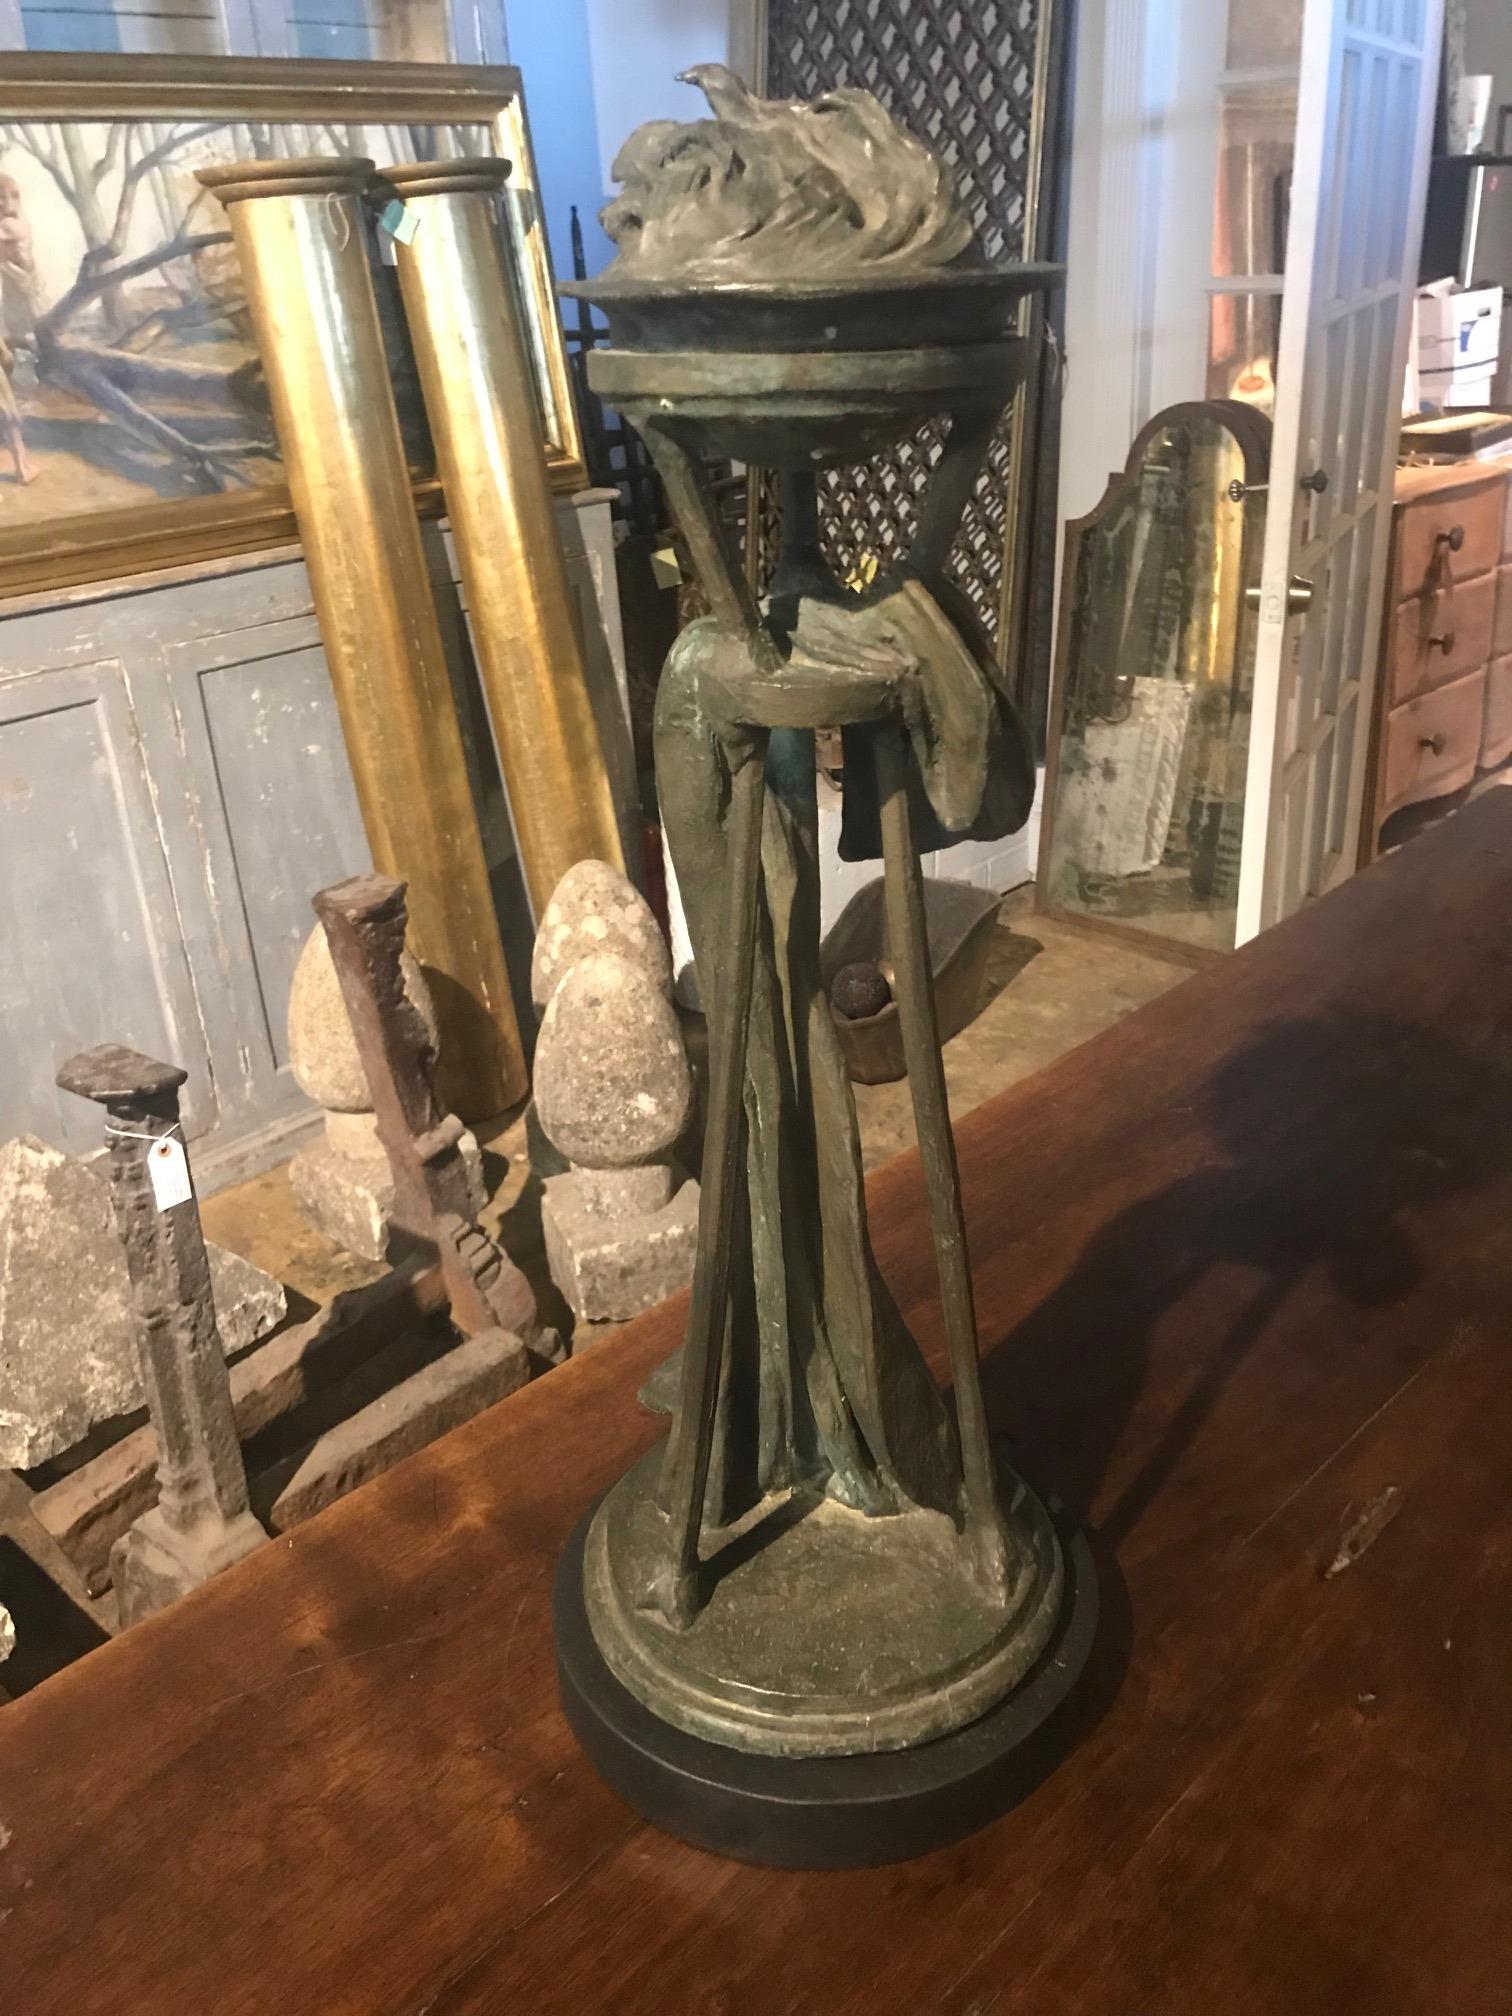 A stunning later 19th century architectural sculpture of flame finial exquisitely cast in bronze. The sculpture is now presented on its custom made iron base.